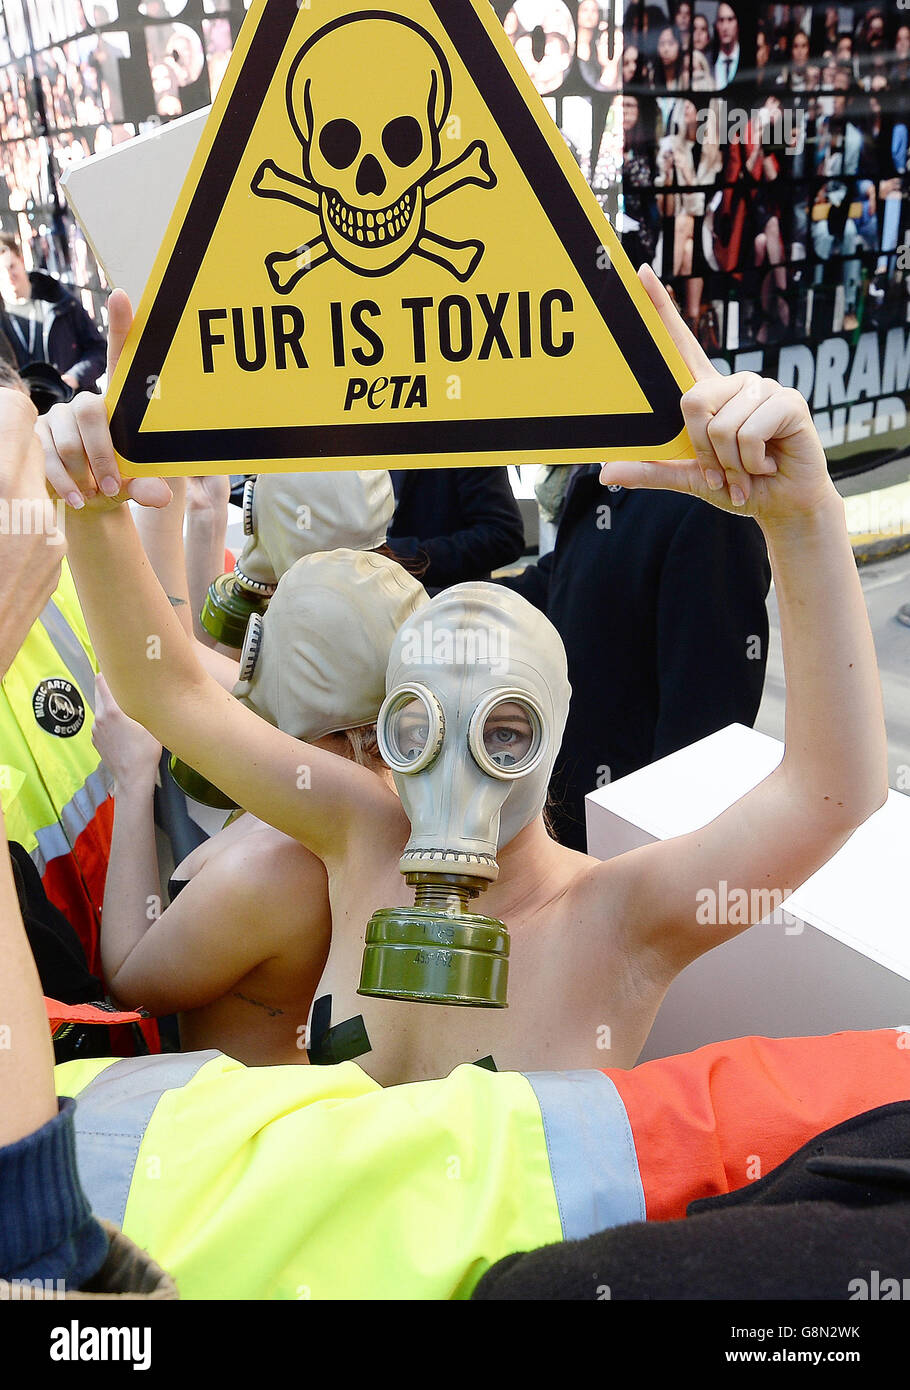 Models dressed in knickers and gas masks from Peta protest against the use of fur clothing and accessories, during London Fashion Week, in Soho, London. Stock Photo